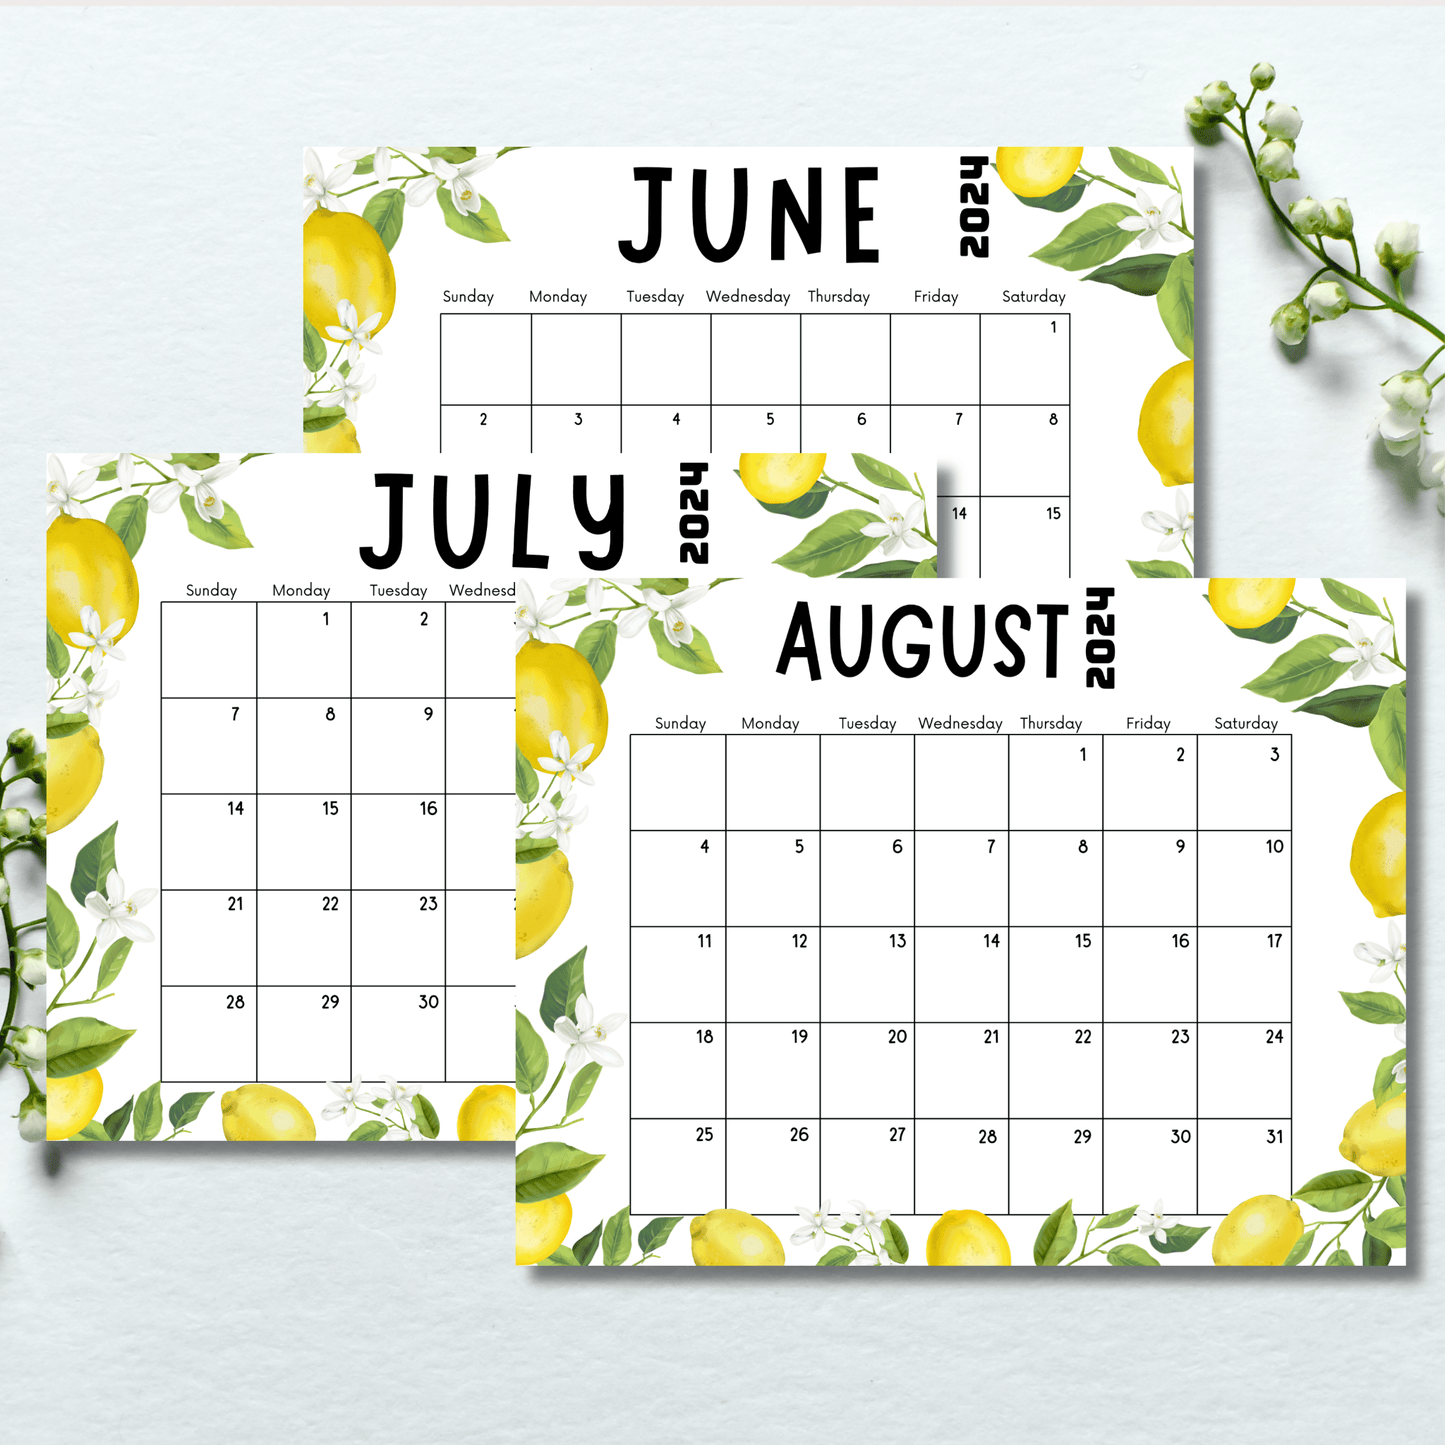 free june, july and august monthly calendar templates for printing on light blue background